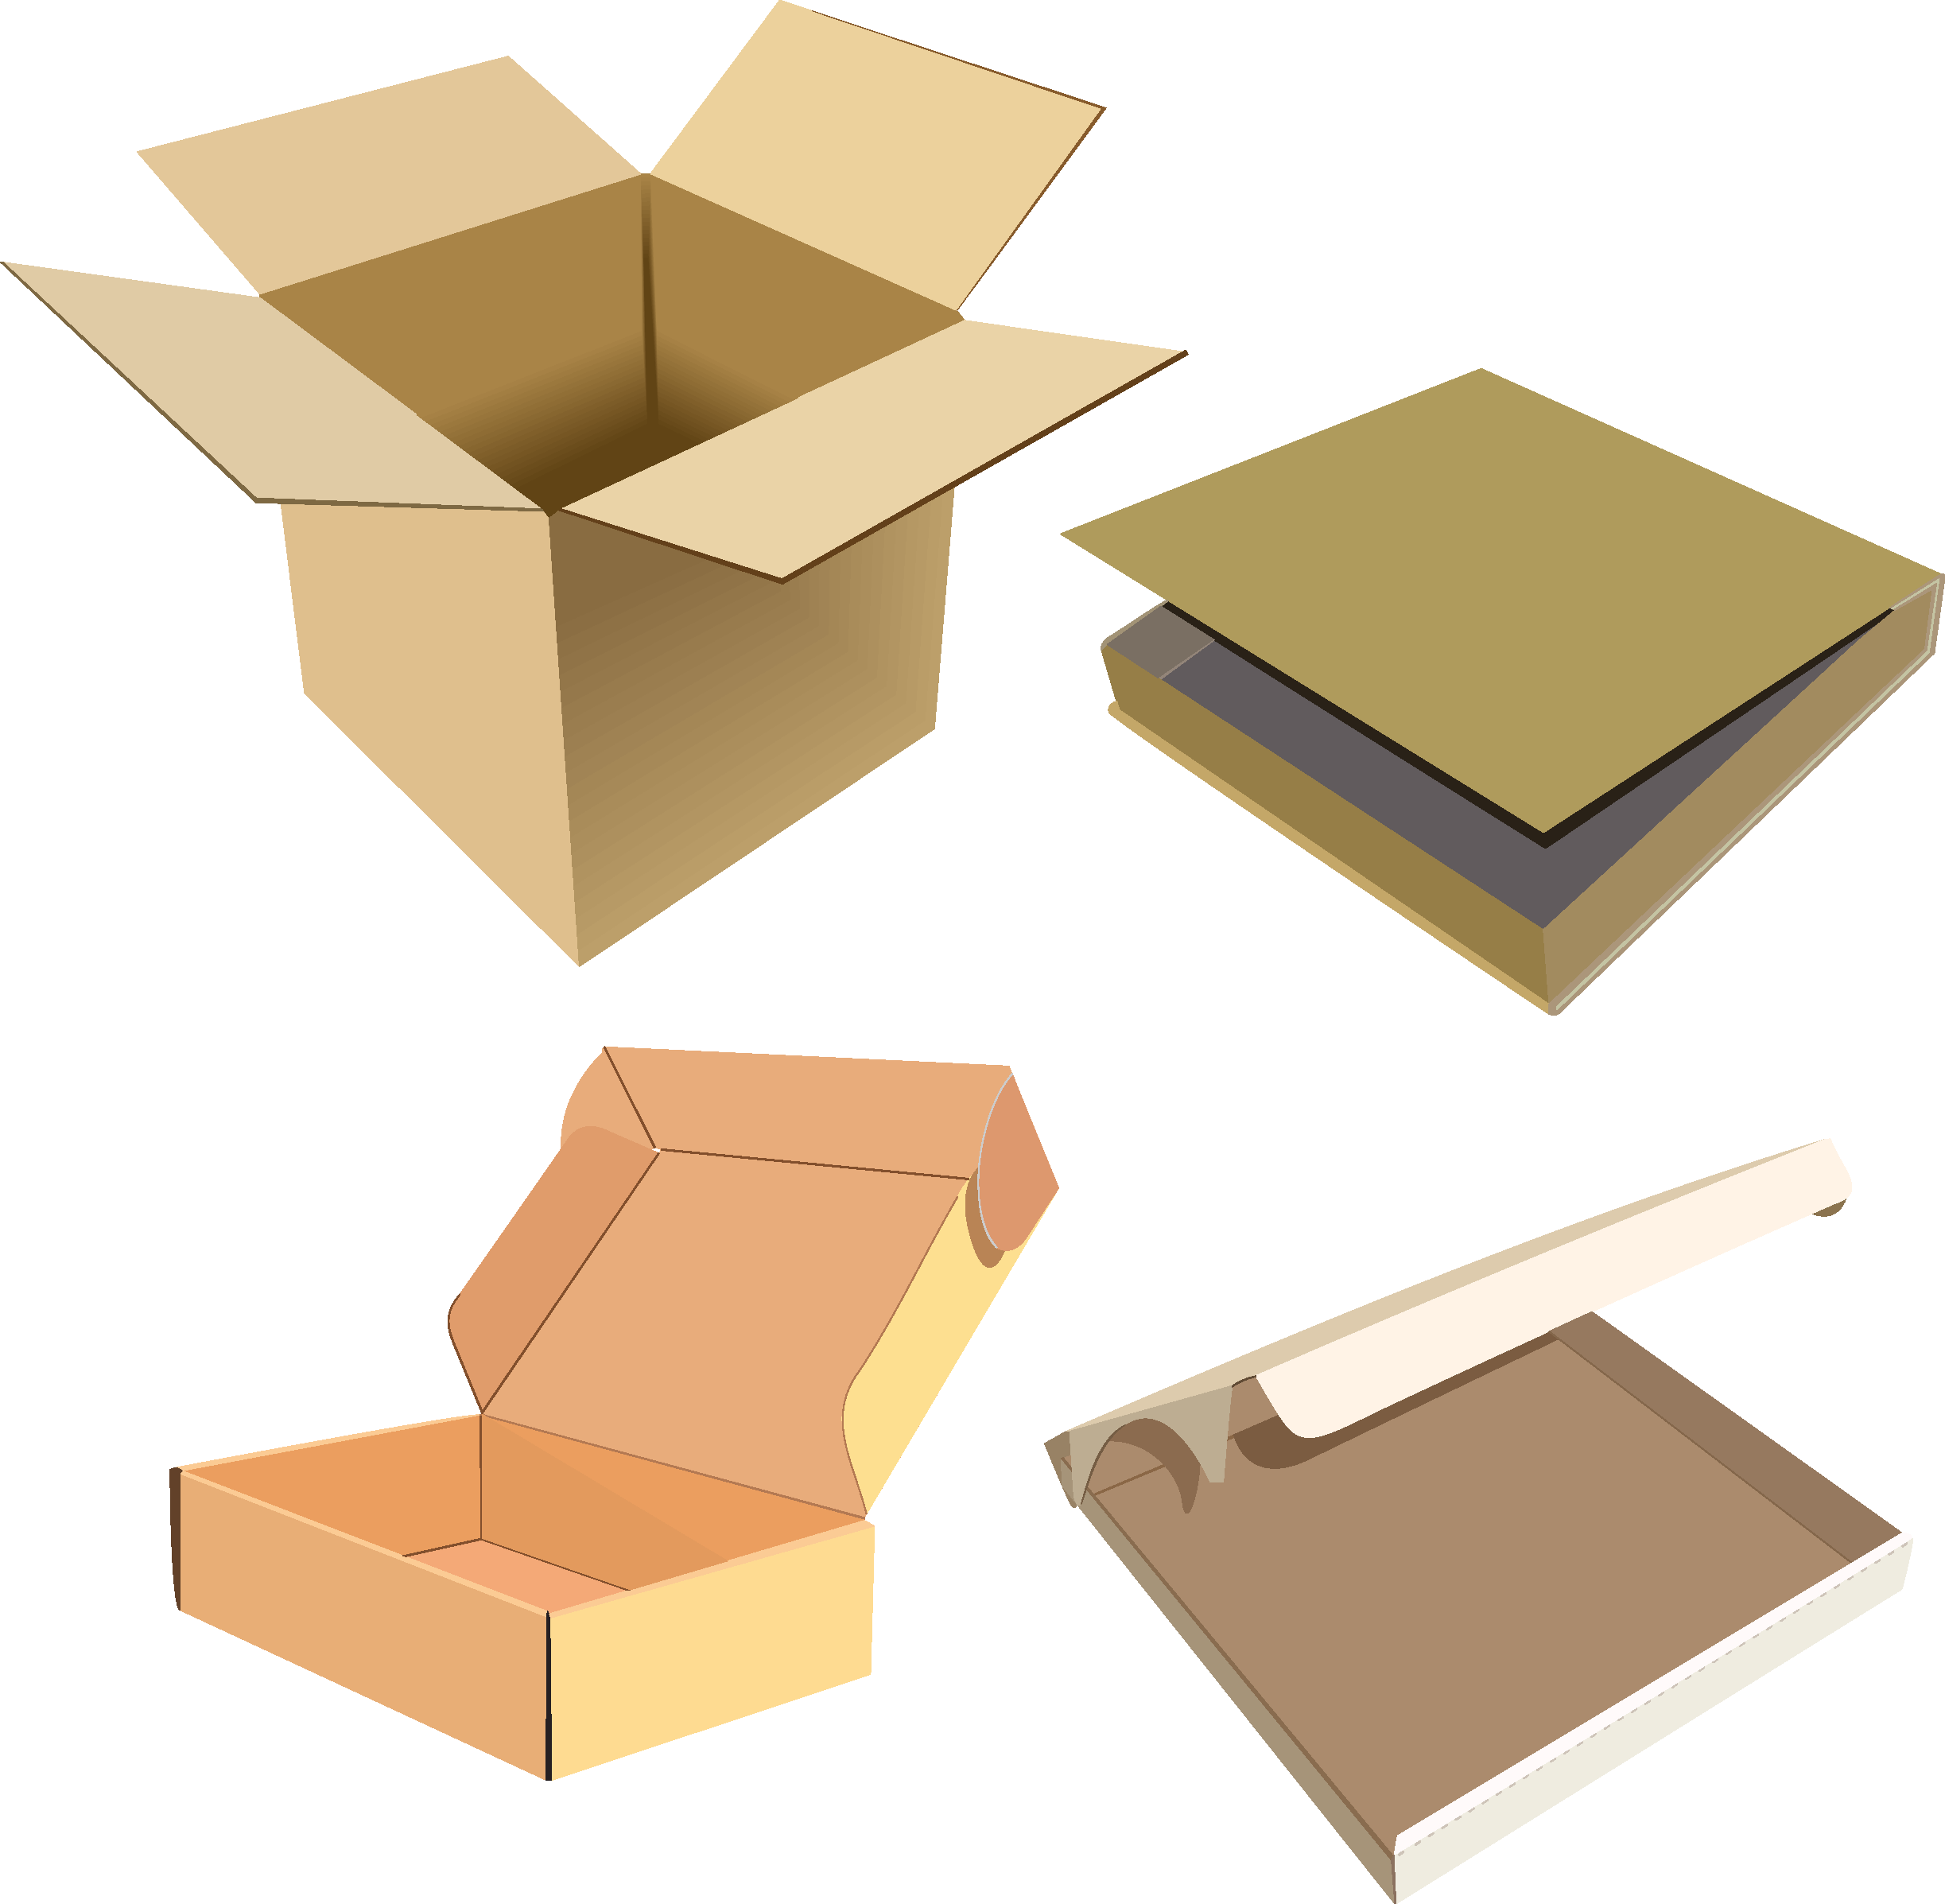 A Group Of Boxes With Different Sizes